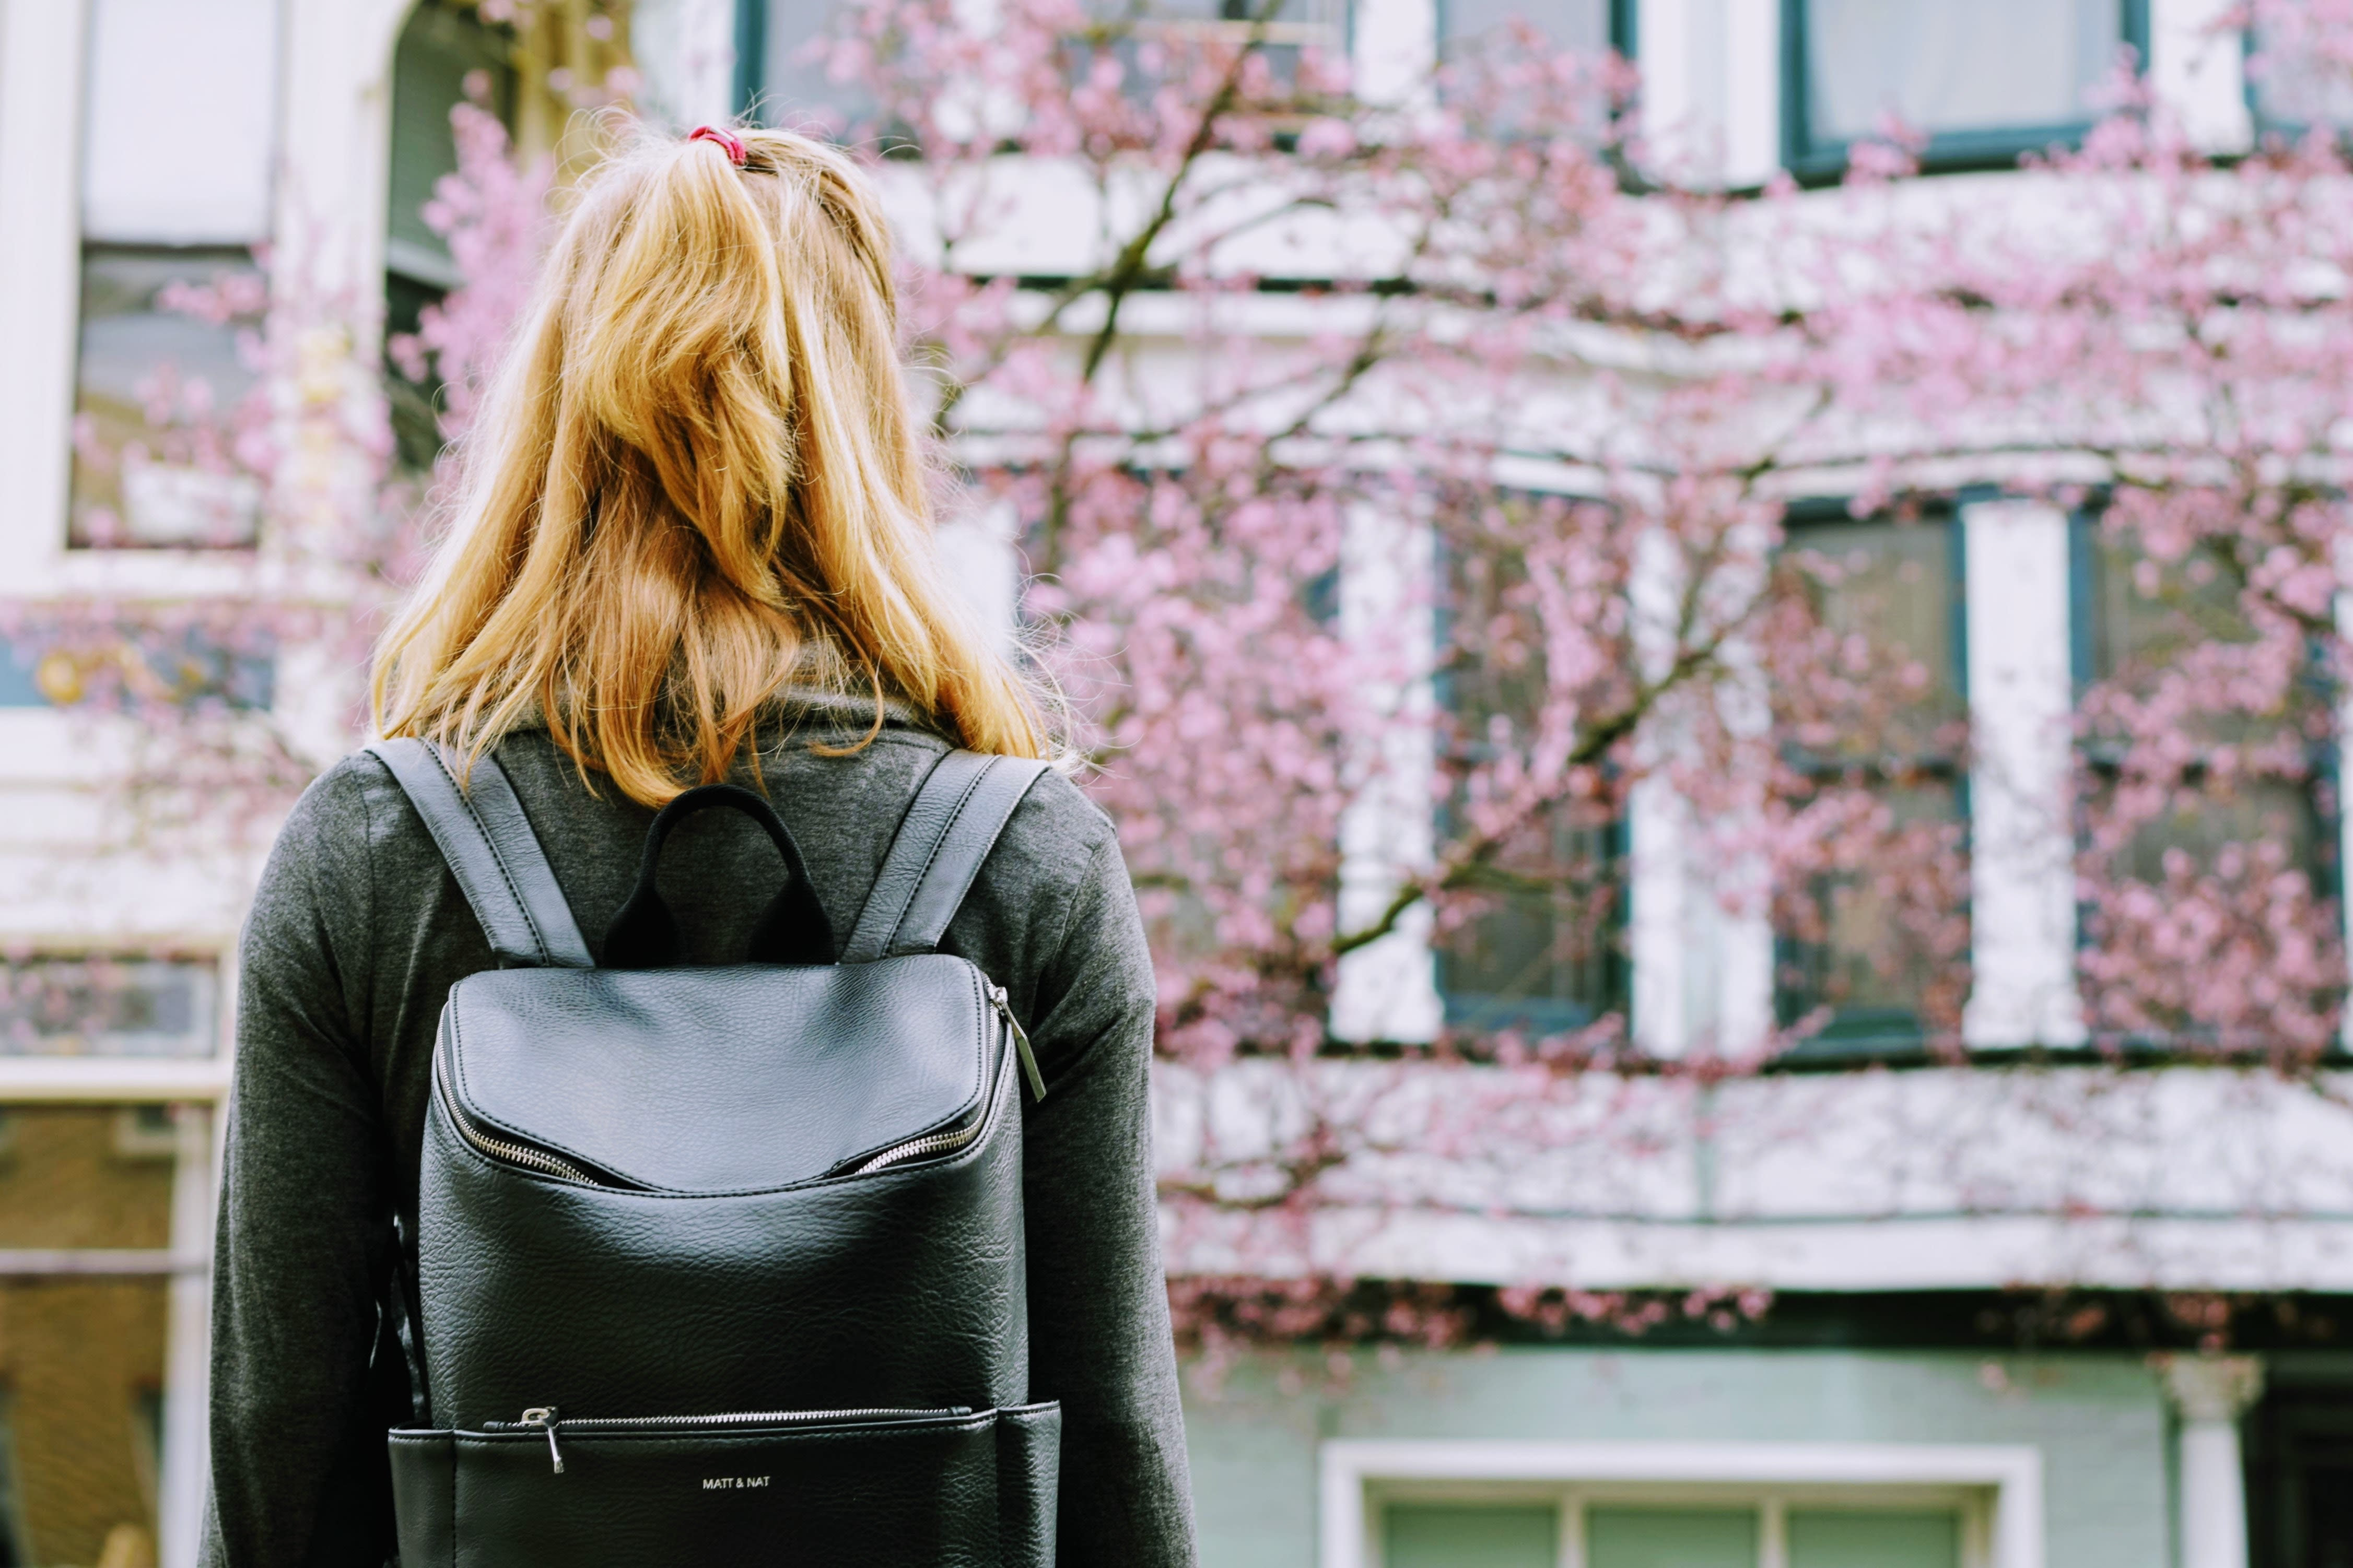 CLN - The perfect backpack for all the career women out there